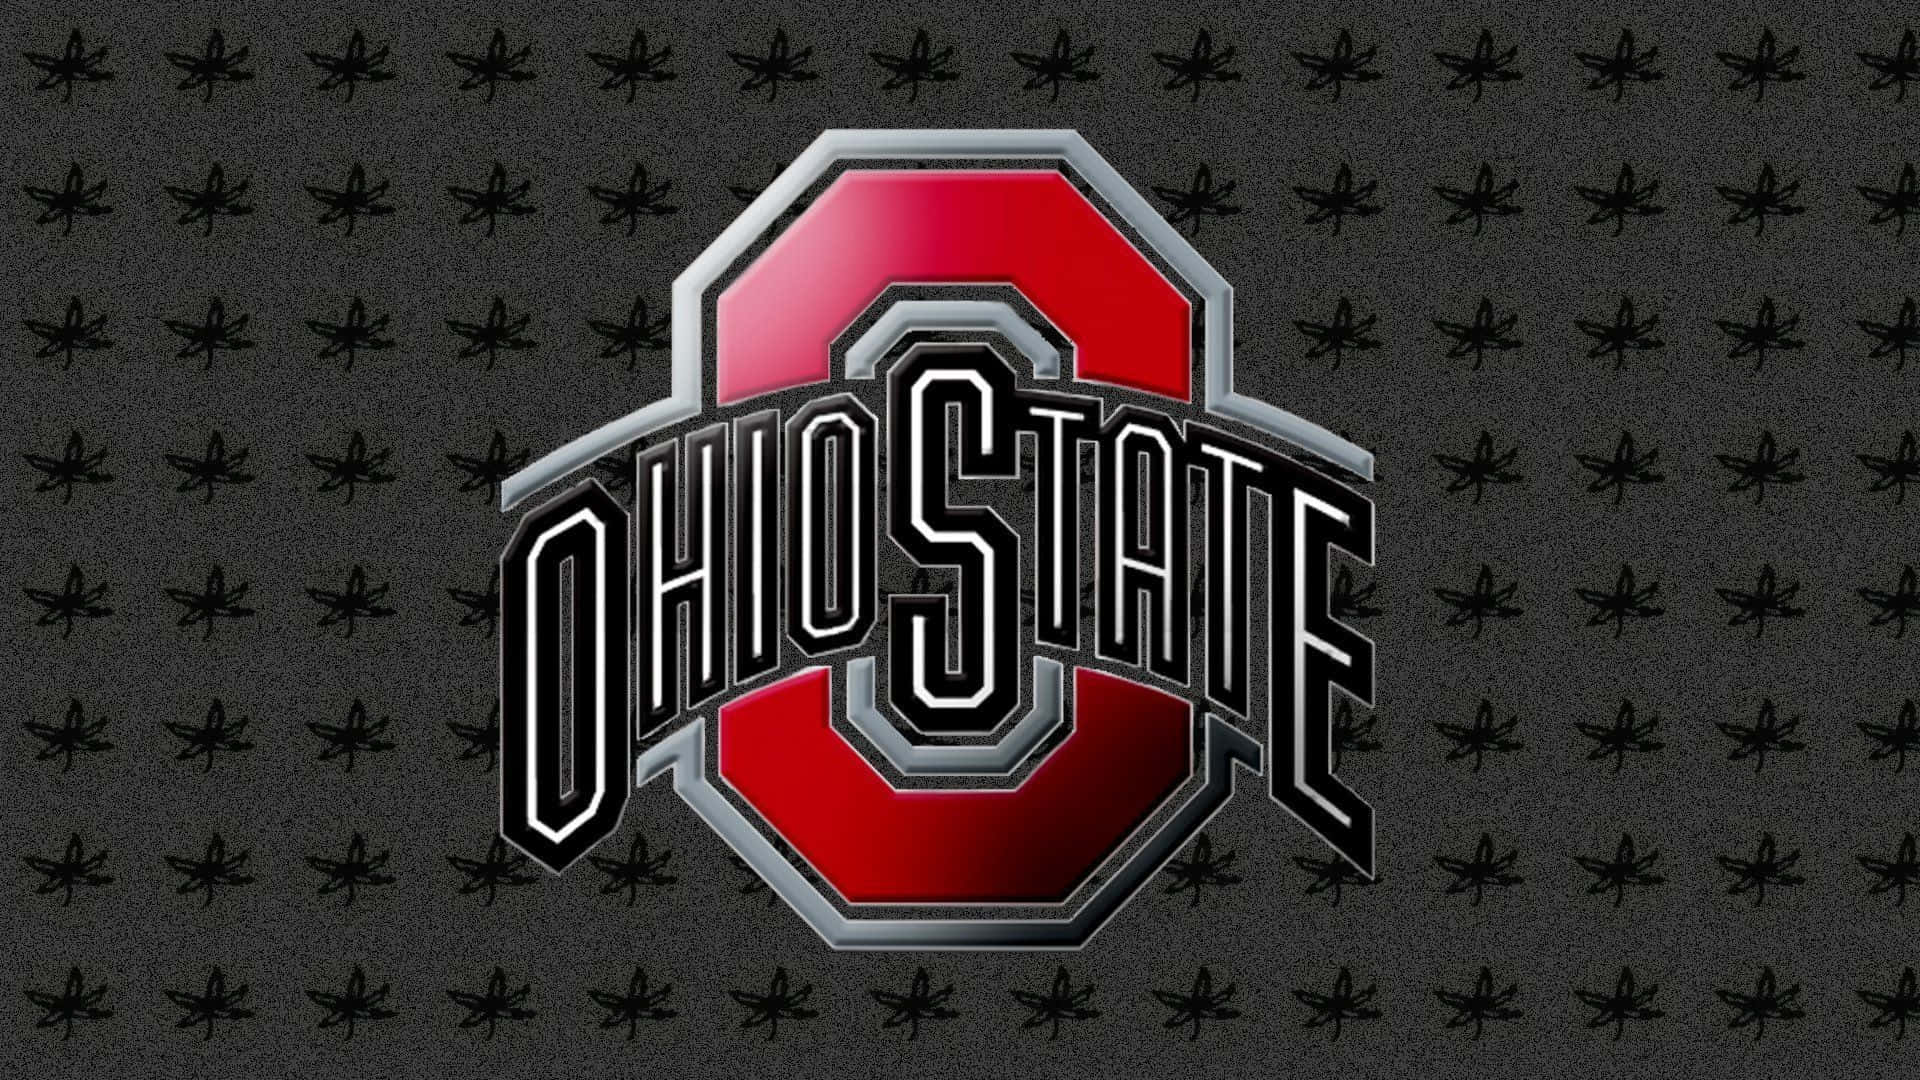 Show your Buckeyes pride with this cool Ohio State backdrop! Wallpaper